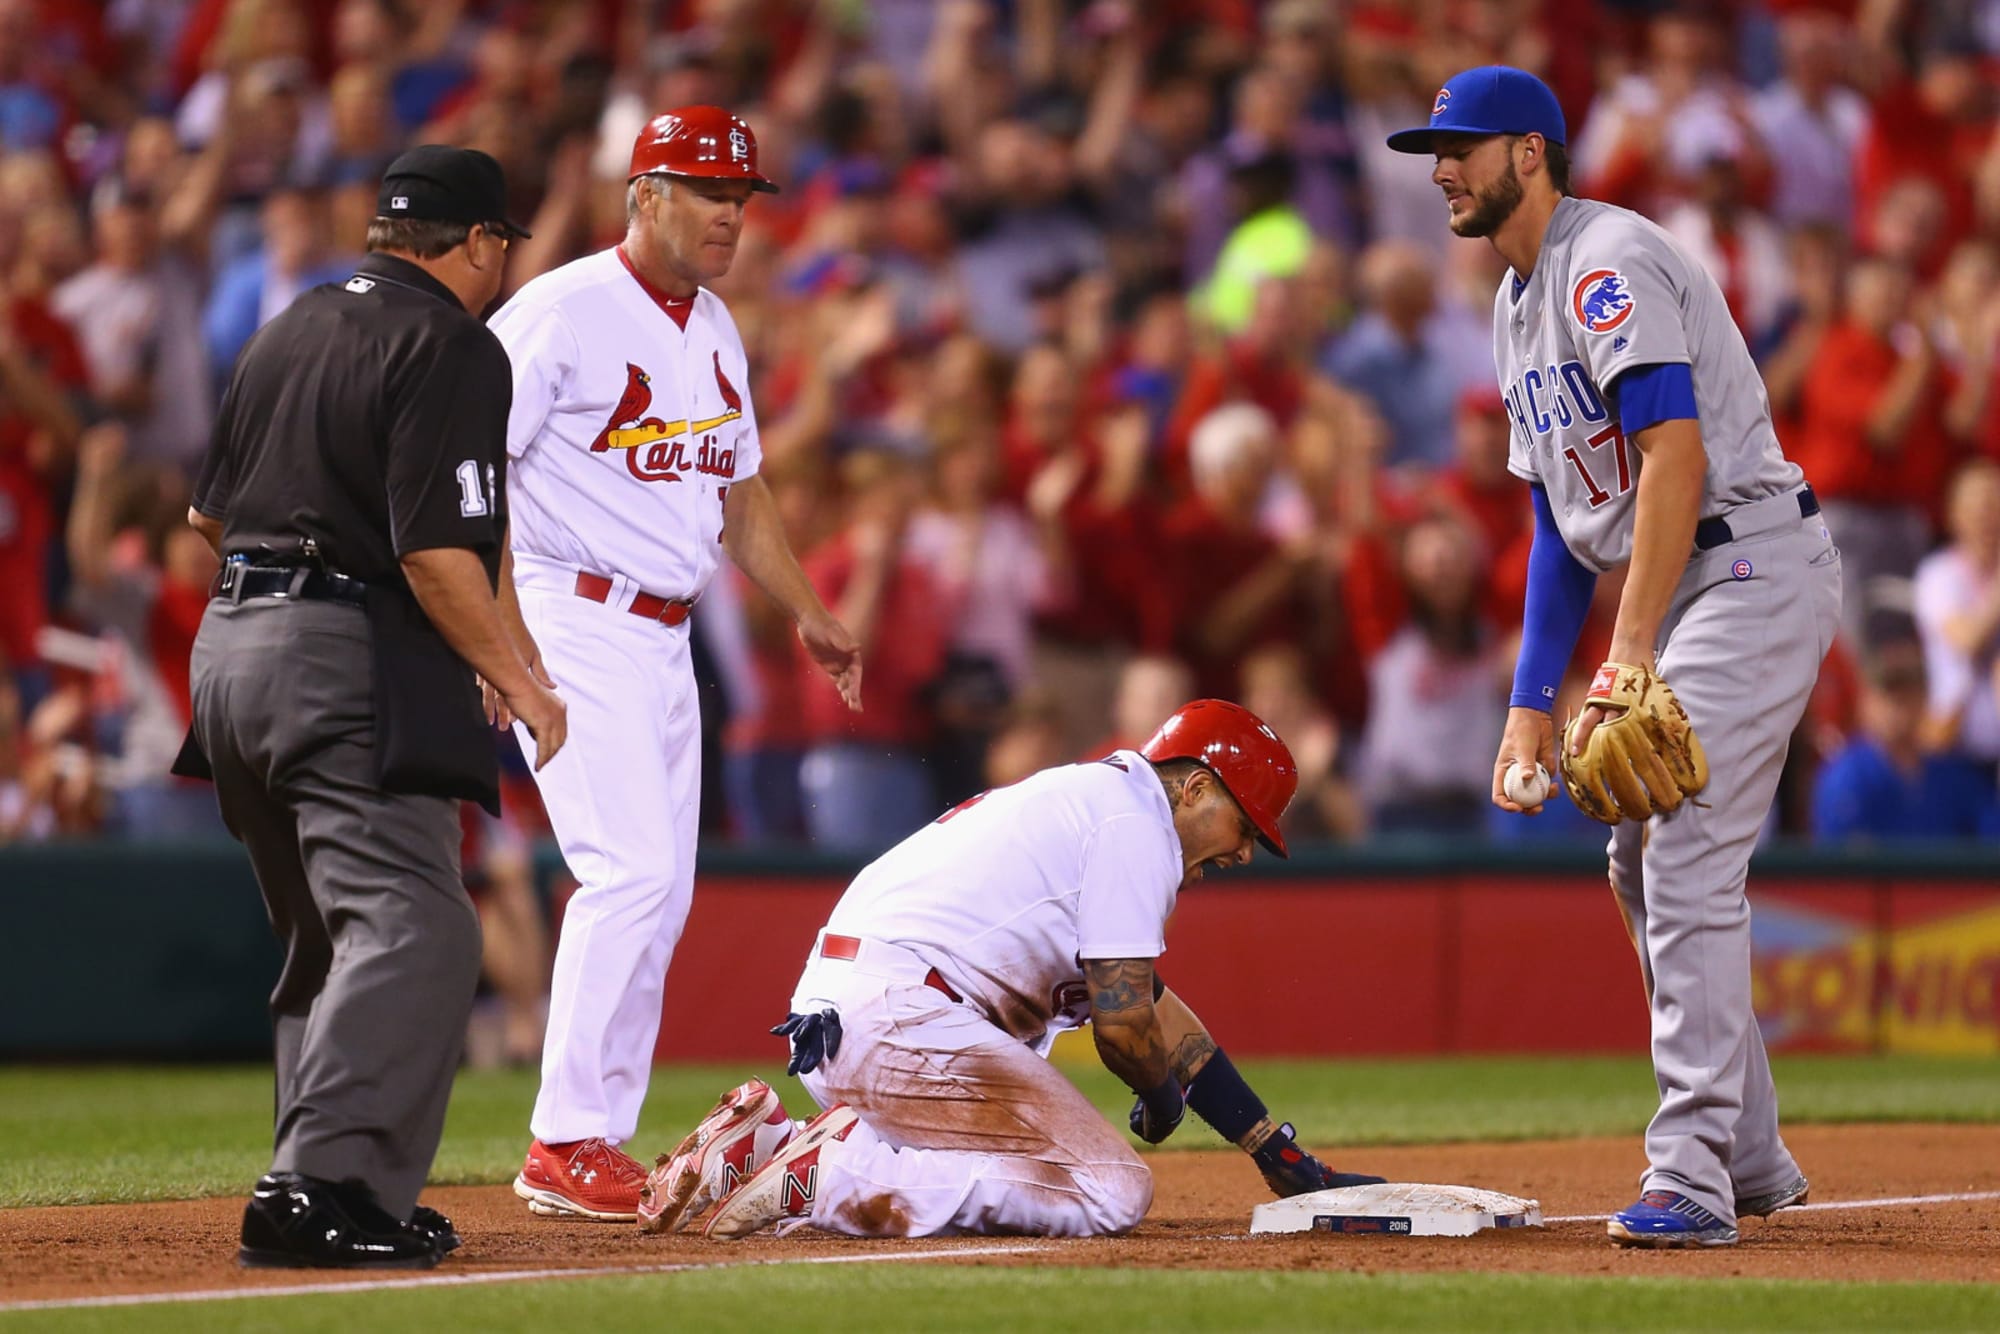 Kris Bryant ignites Chicago Cubs/St. Louis Cardinals rivalry